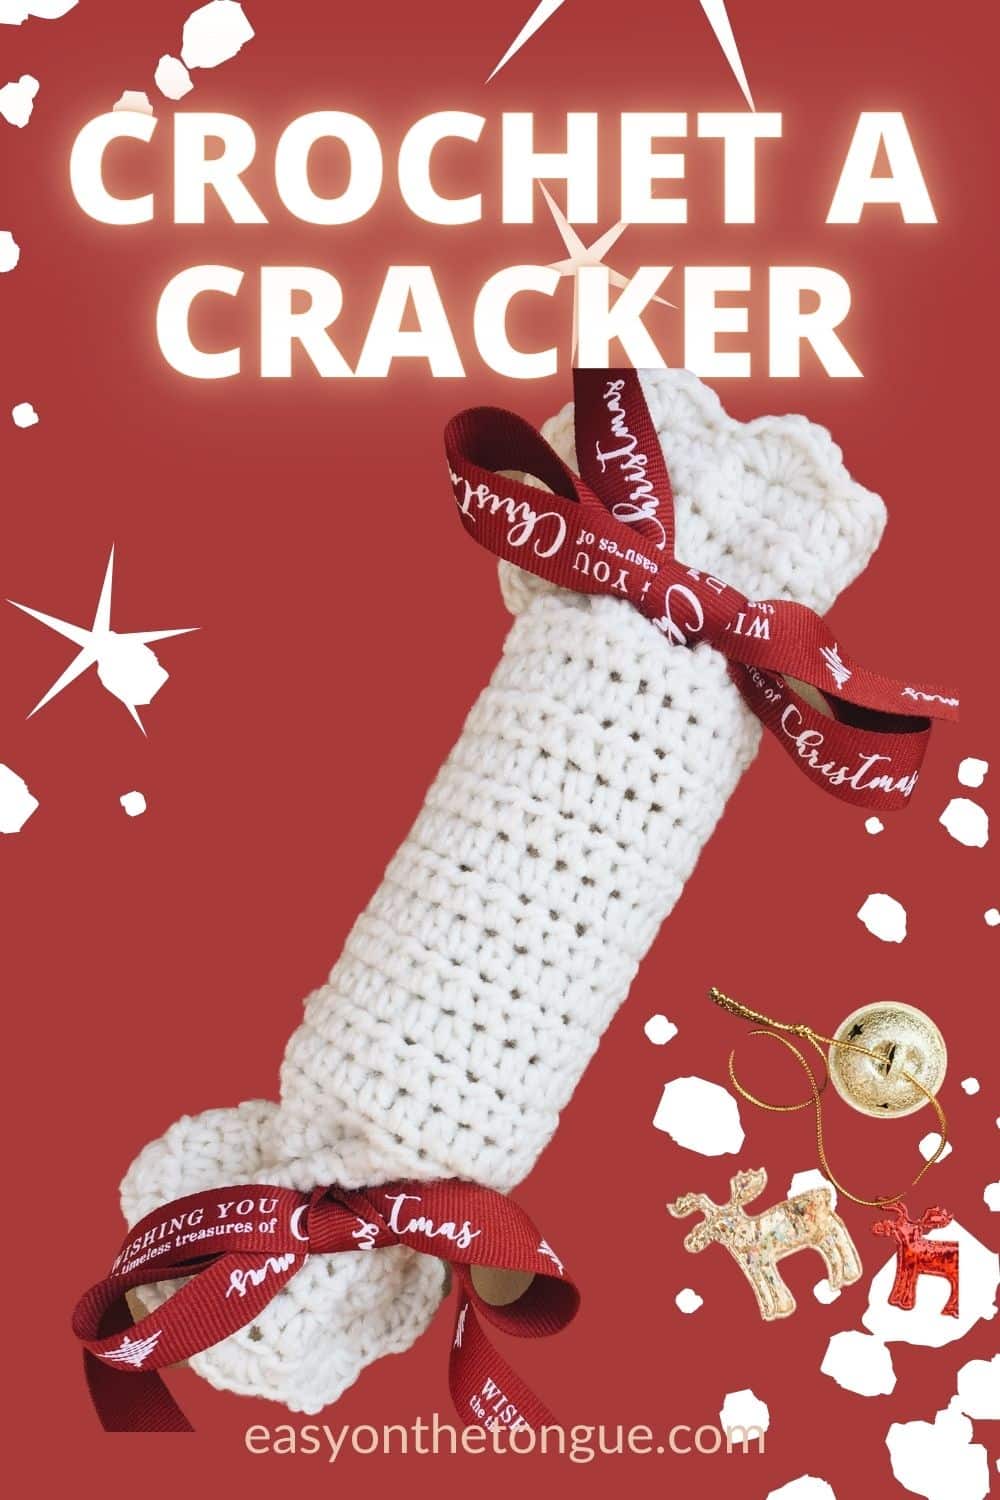 Free Crochet Pattern to make your own Christmas Crackers available at easyonthetongue.com  How to crochet Christmas crackers, free pattern